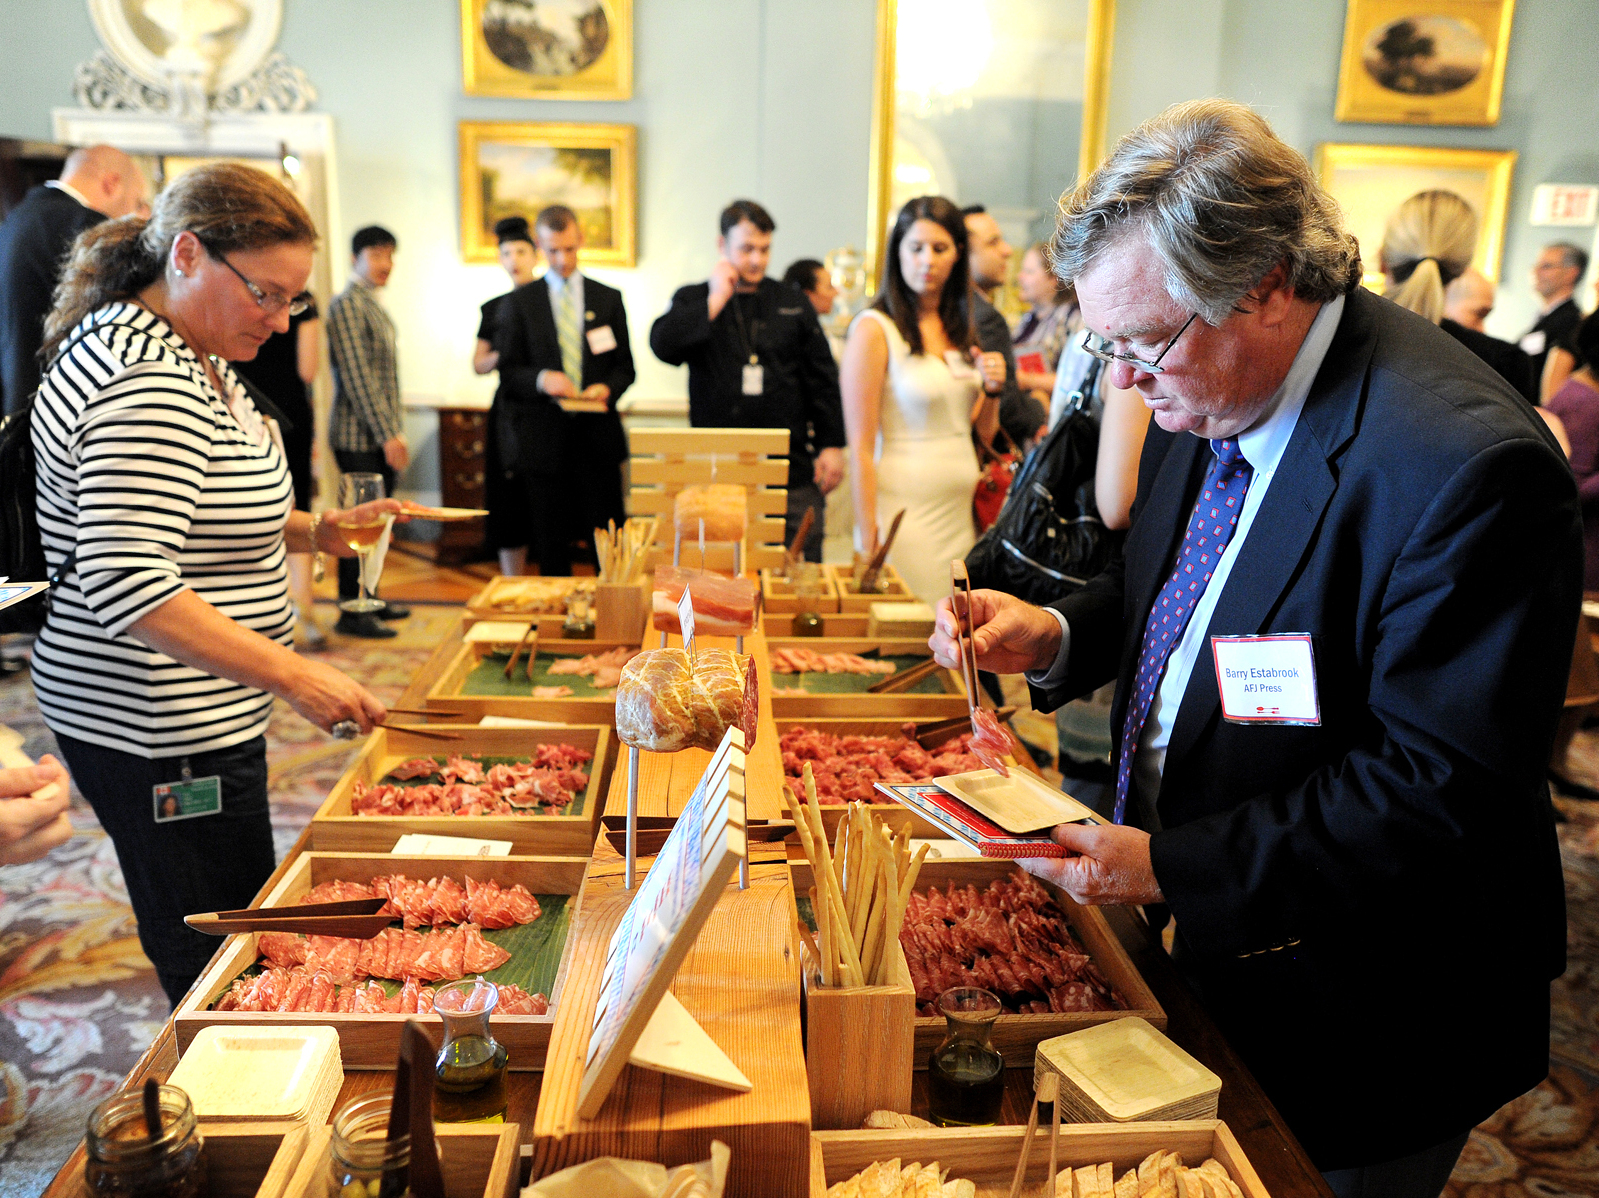 Participants of the Diplomatic Culinary Partnership try different foods at the State Department in Washington during a gathering of the American Chef Corps, a network of chefs from across the U.S. Photo: Jewel Samad/AFP/Getty Images